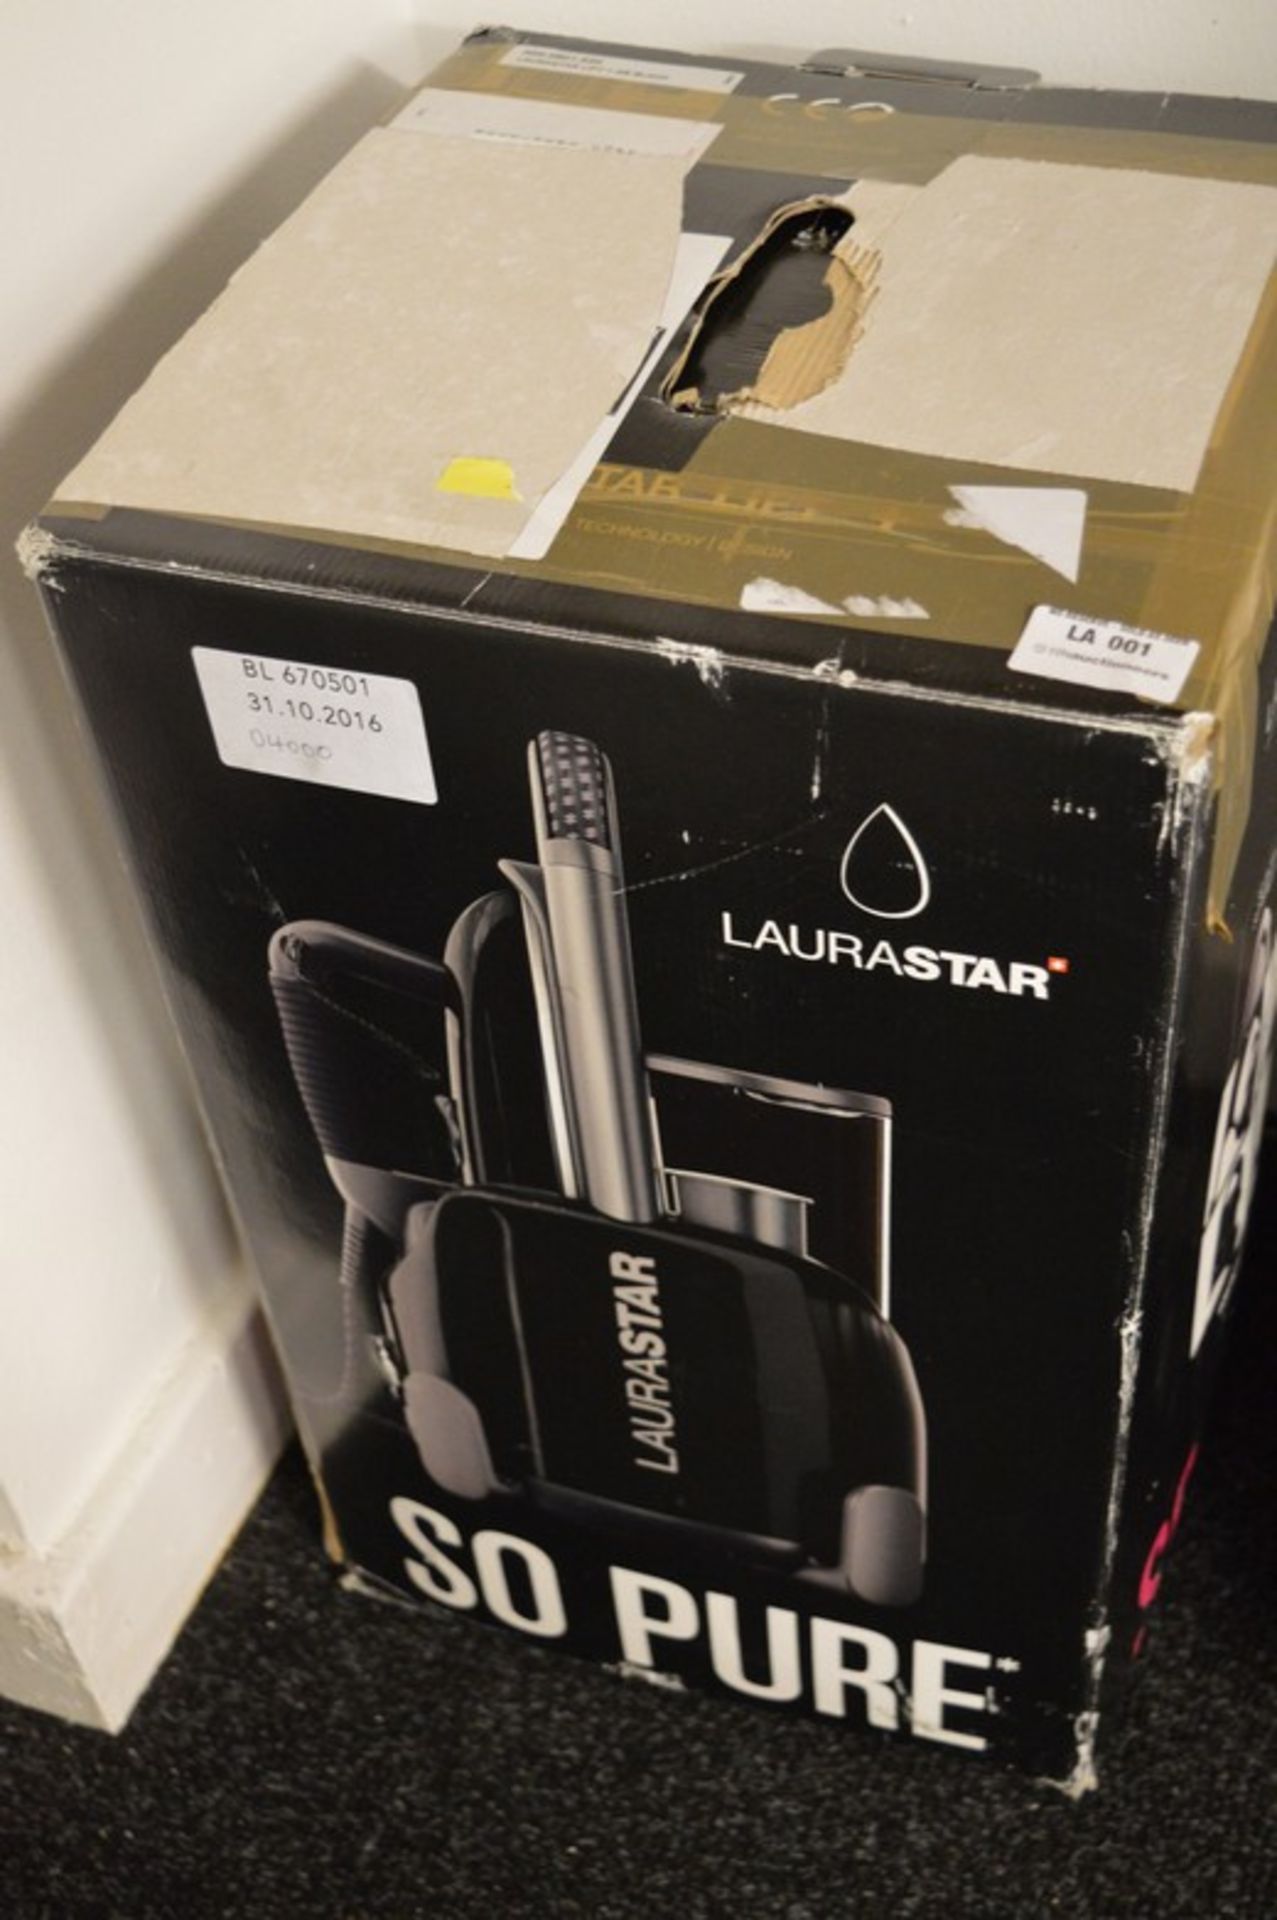 1 x BOXED LAURA STAR SO PURE STEAM IRON WITH STEAM GENERATOR RRP £400 31.10.16 *PLEASE NOTE THAT THE